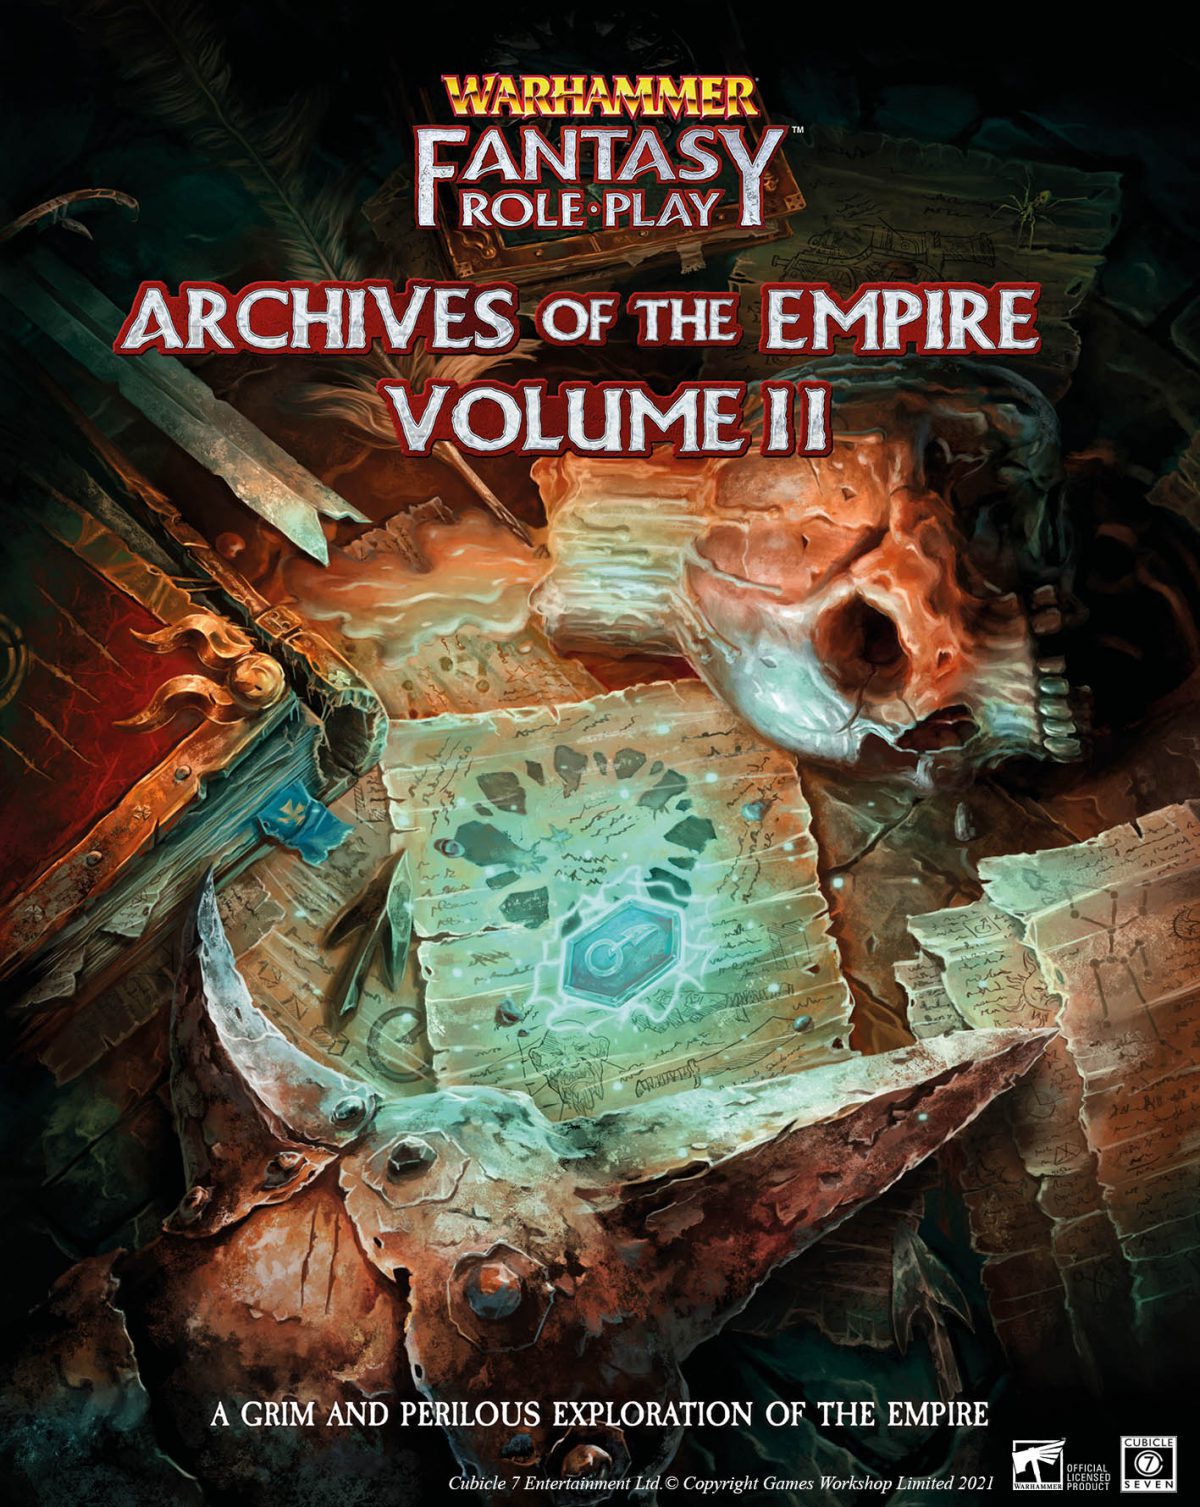 Archives Of The Empire Volume II - Warhammer Fantasy Role-Play